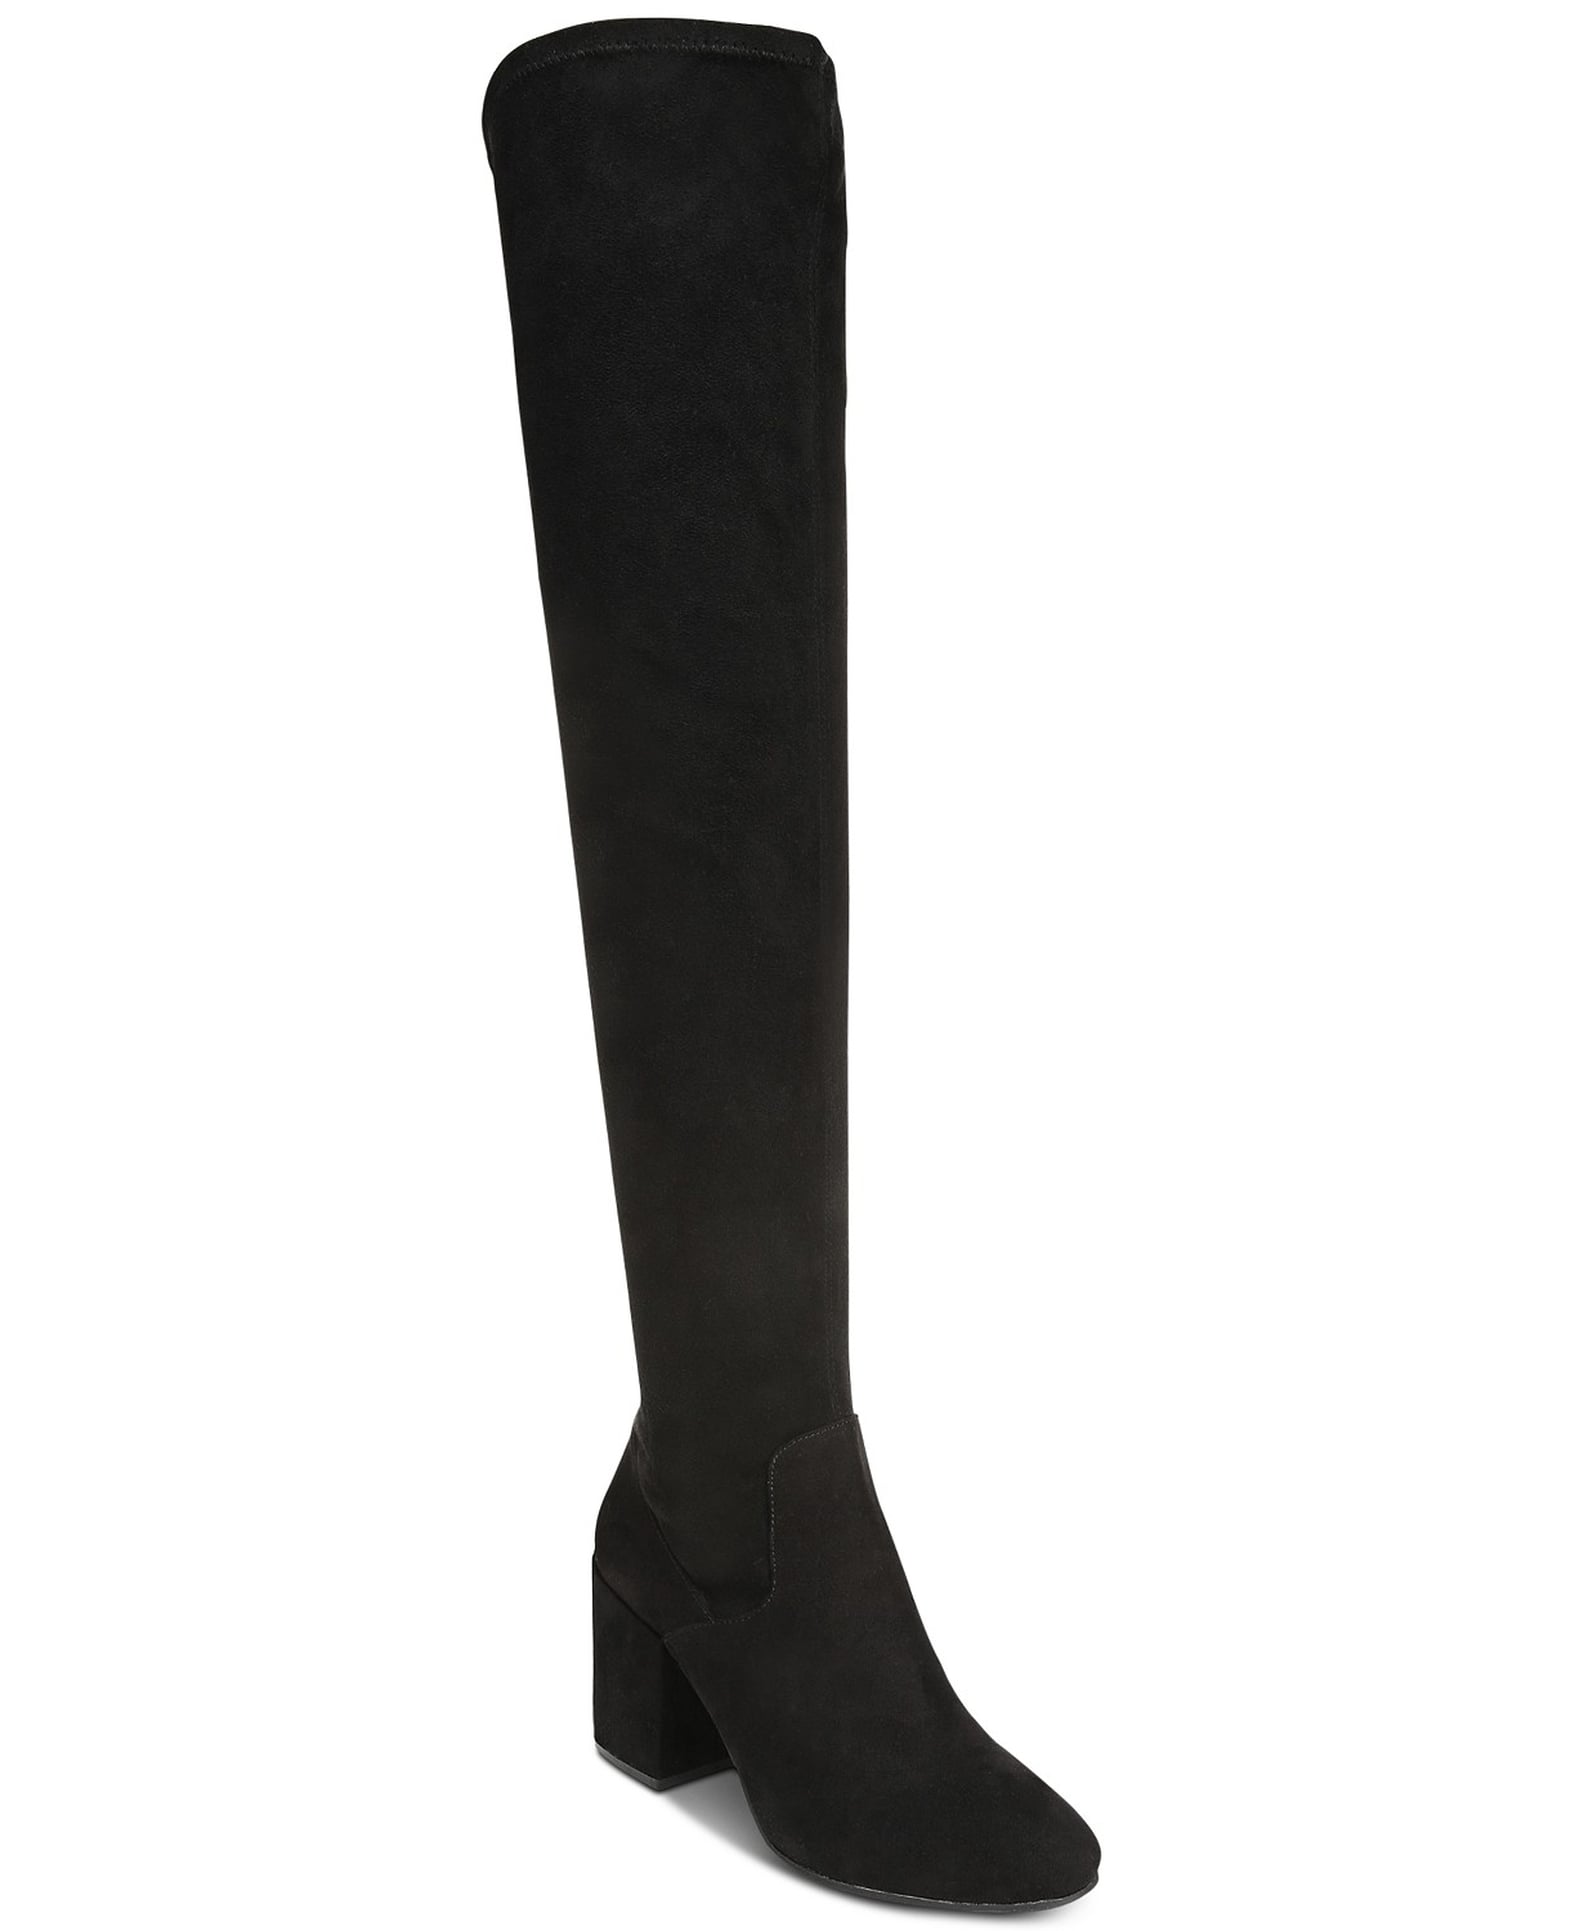 Comfortable and Stylish Boots For Women From Macy's | POPSUGAR Fashion